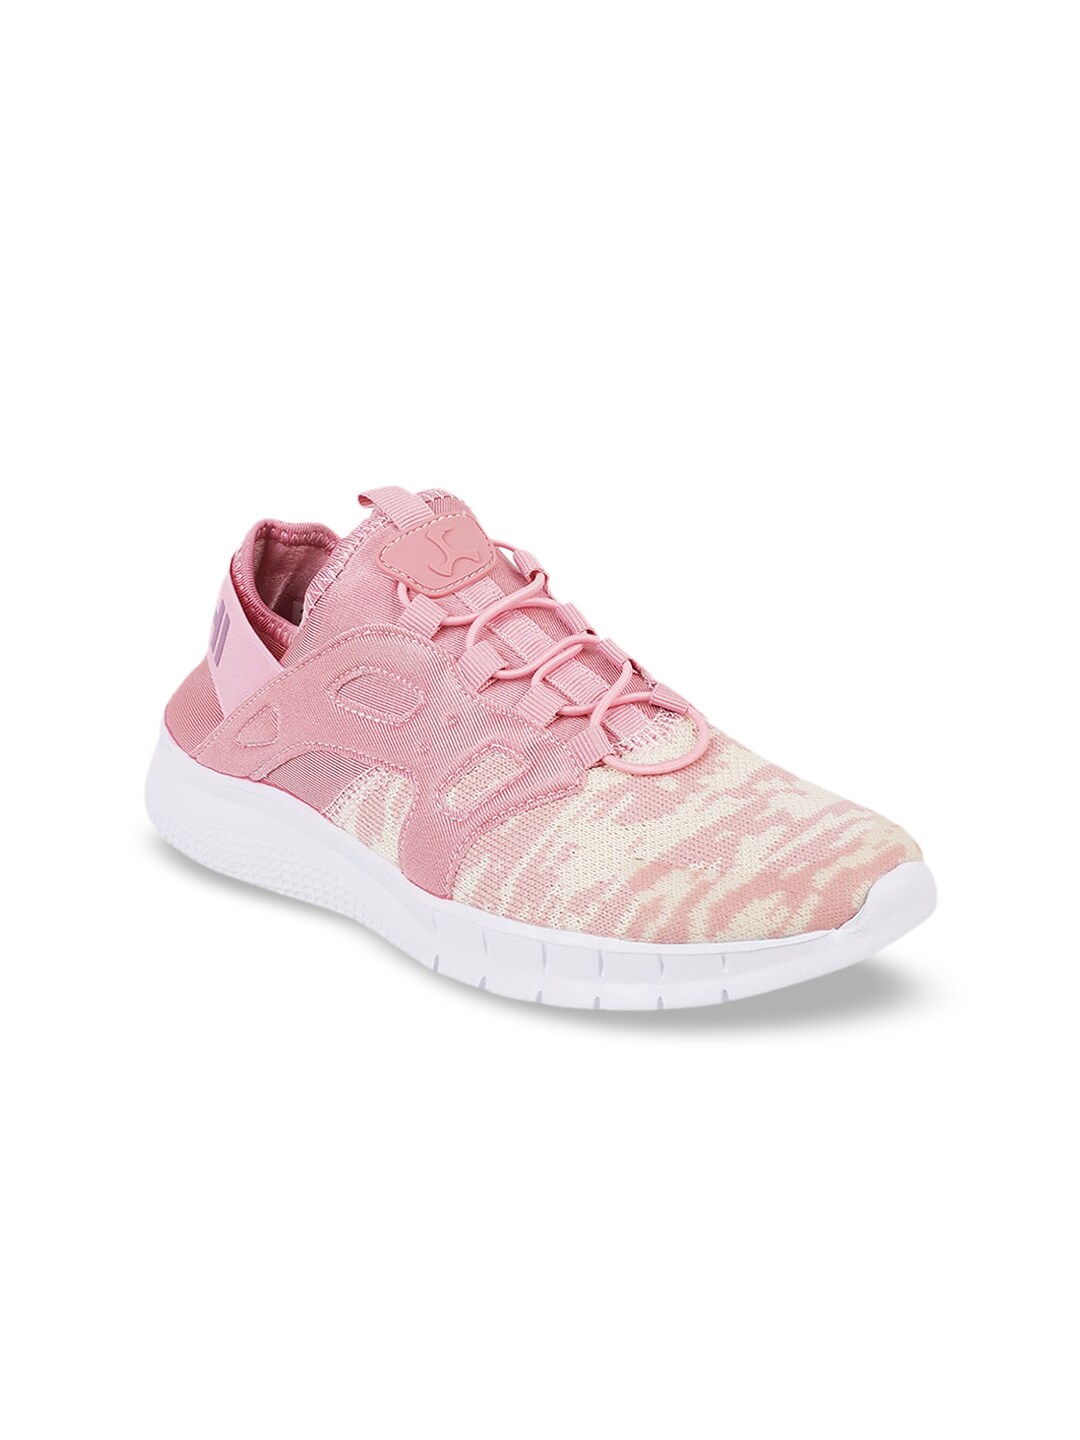 Mochi Women Pink Printed Lace-Ups Sneakers Price in India